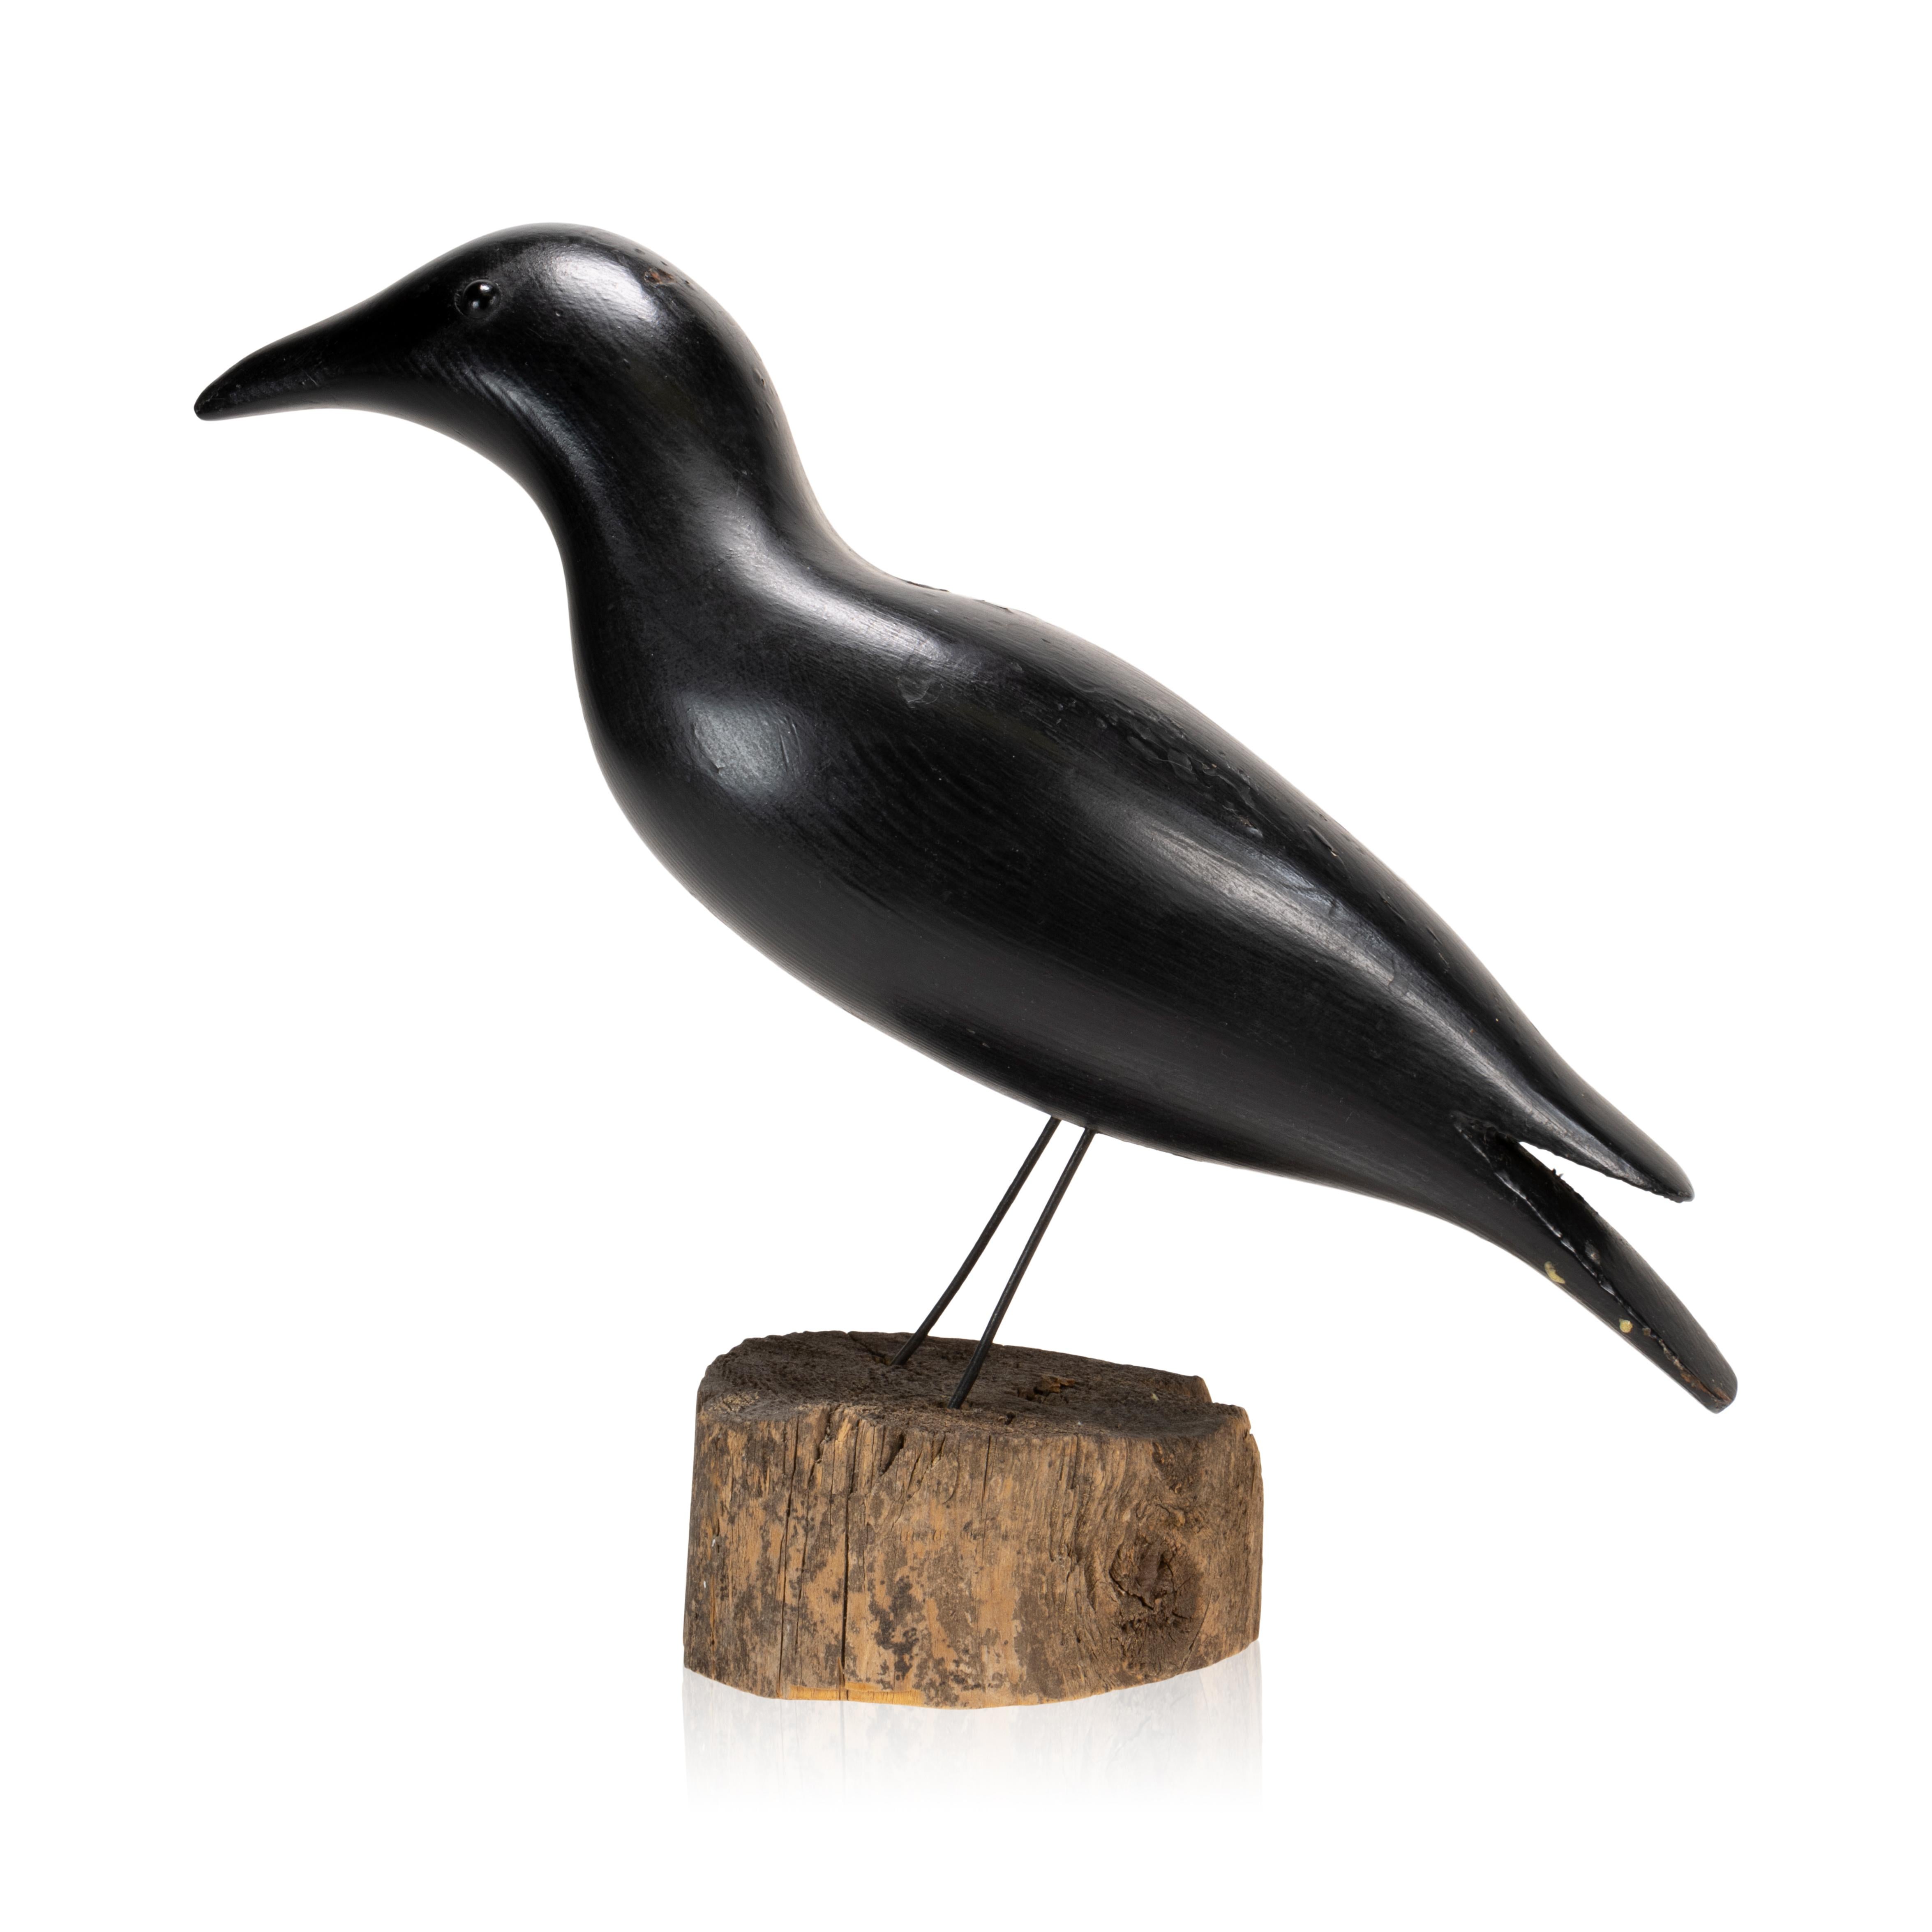 Early 20th Century crow decoy. Carved and painted decoy on wood base. Glass eyes. Initials on bottom 